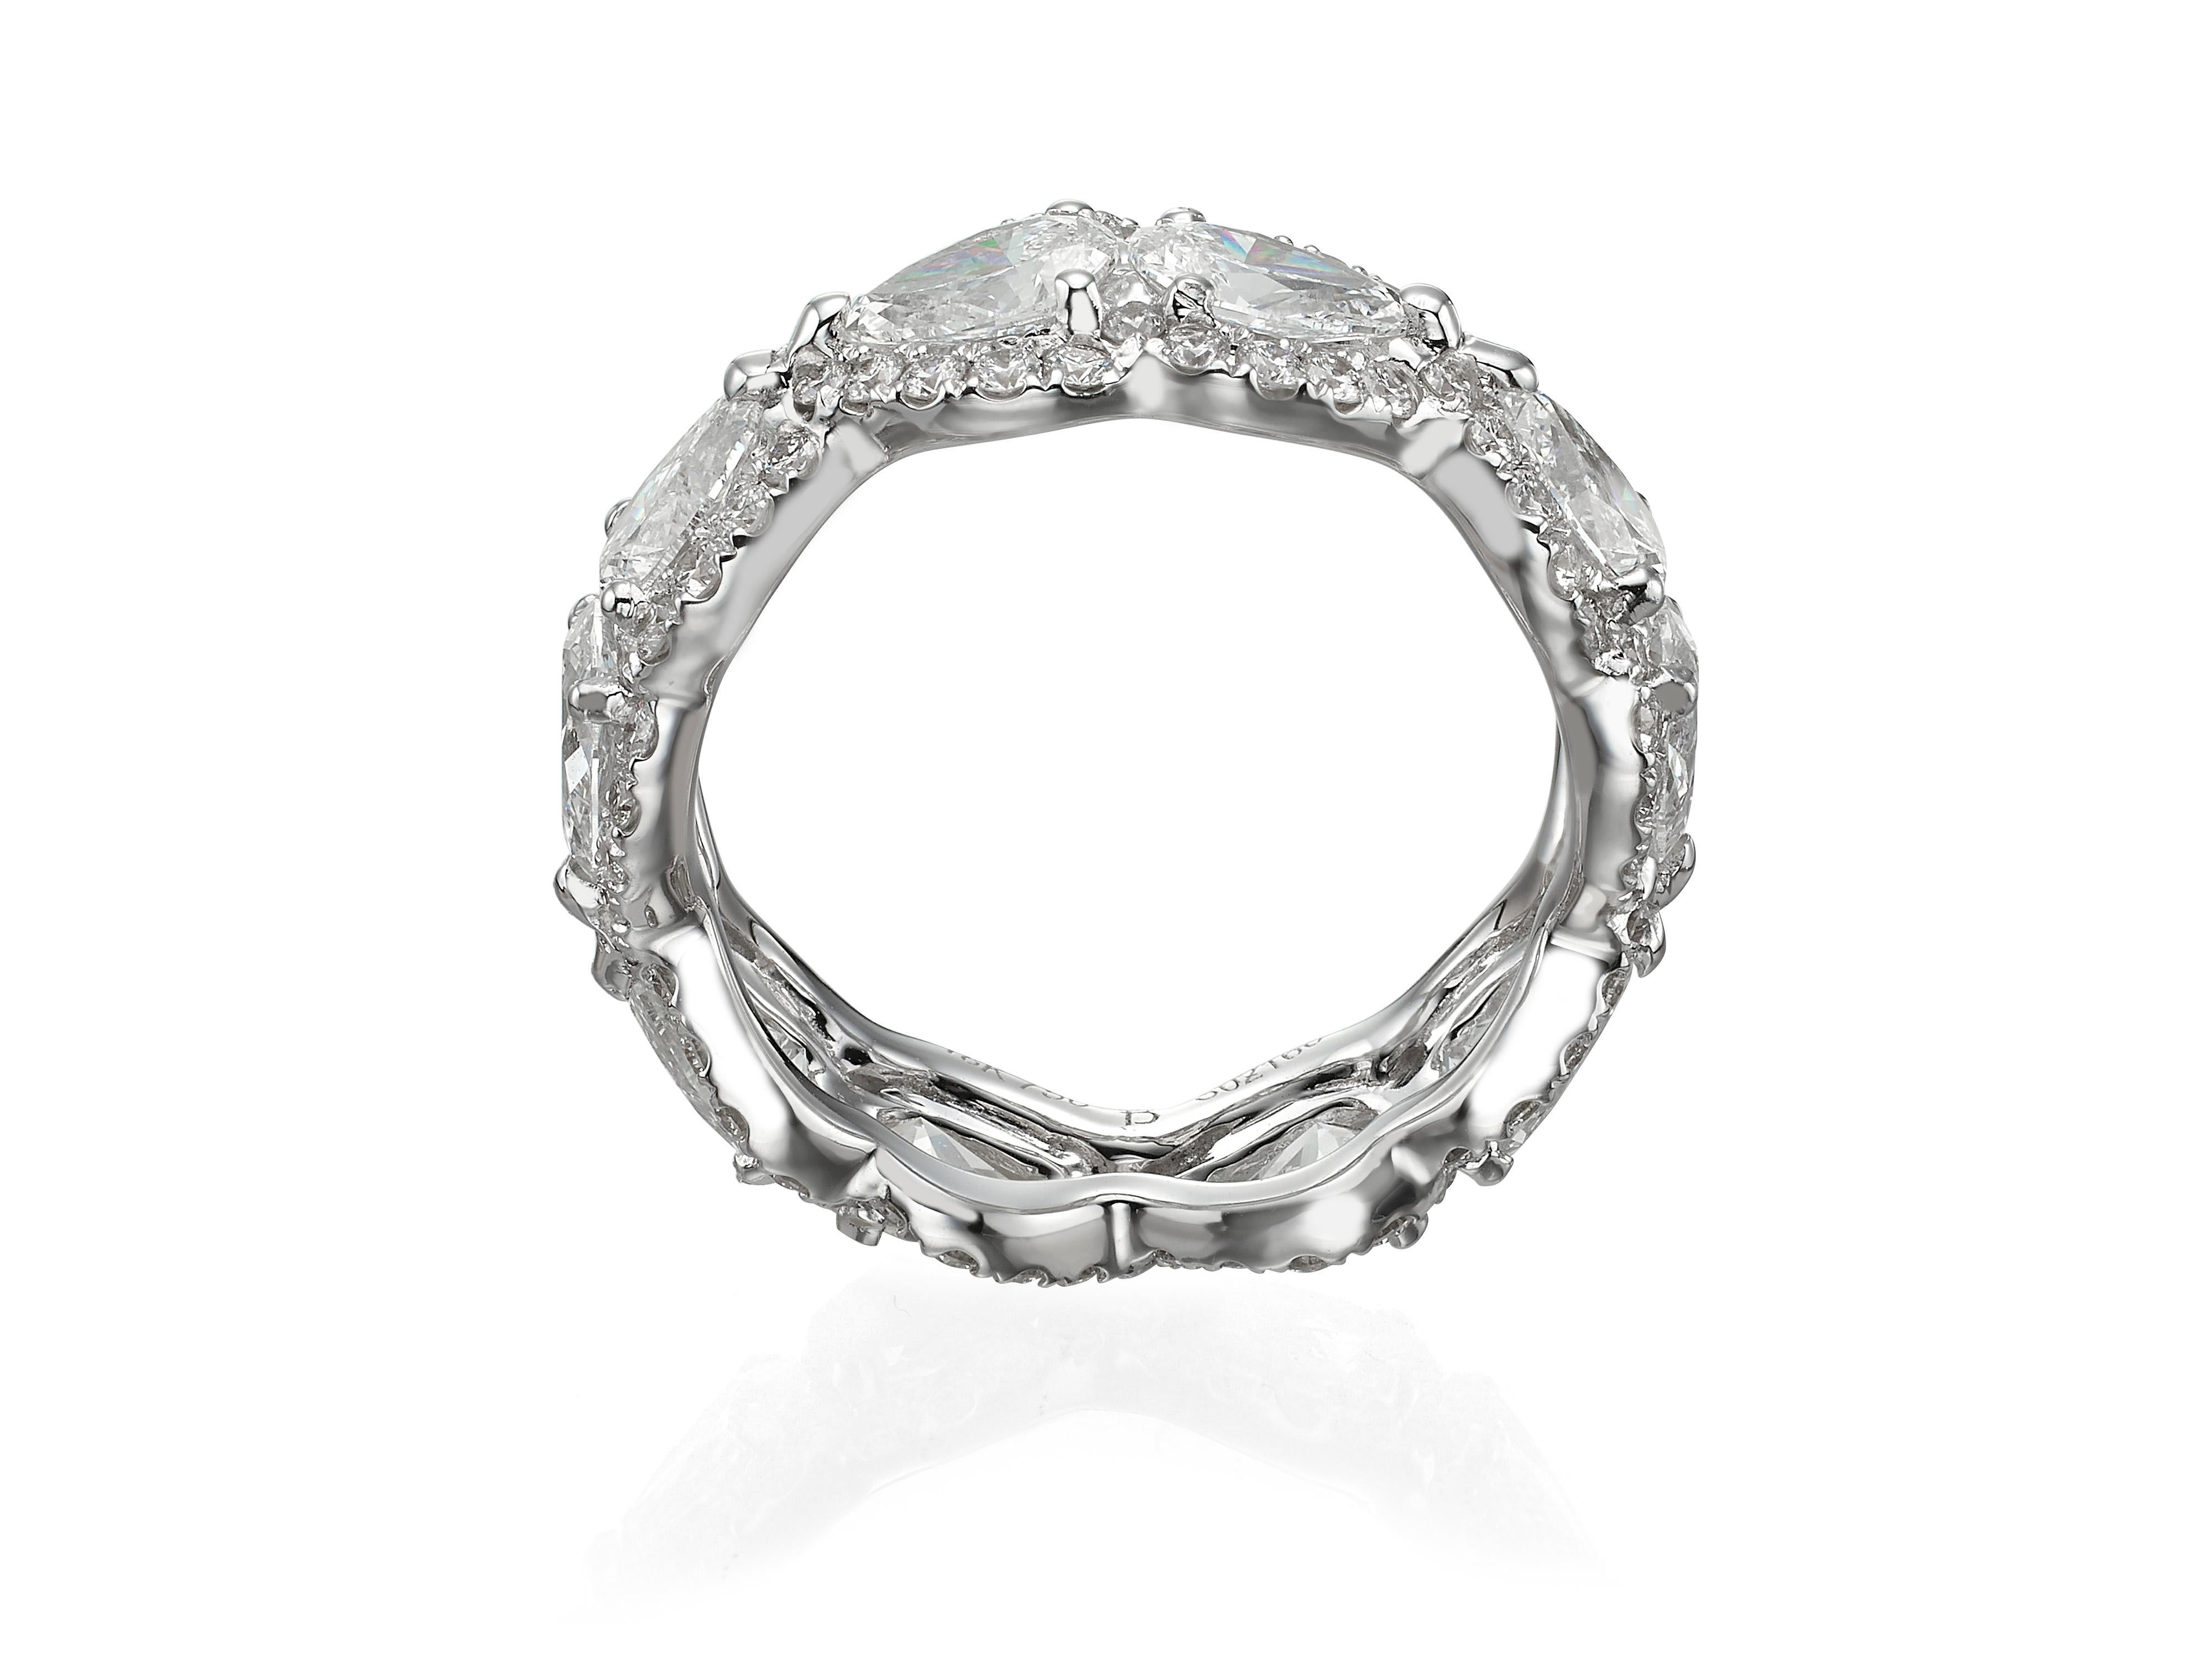 10 pear shape diamonds (totaling 3.23 carats) are encircled by brilliant pavé-set diamond halos (totaling 1.04 carats) in this eye-catching 18K white gold eternity band ring.  Currently a ring size US 7.  For other sizes, please contact